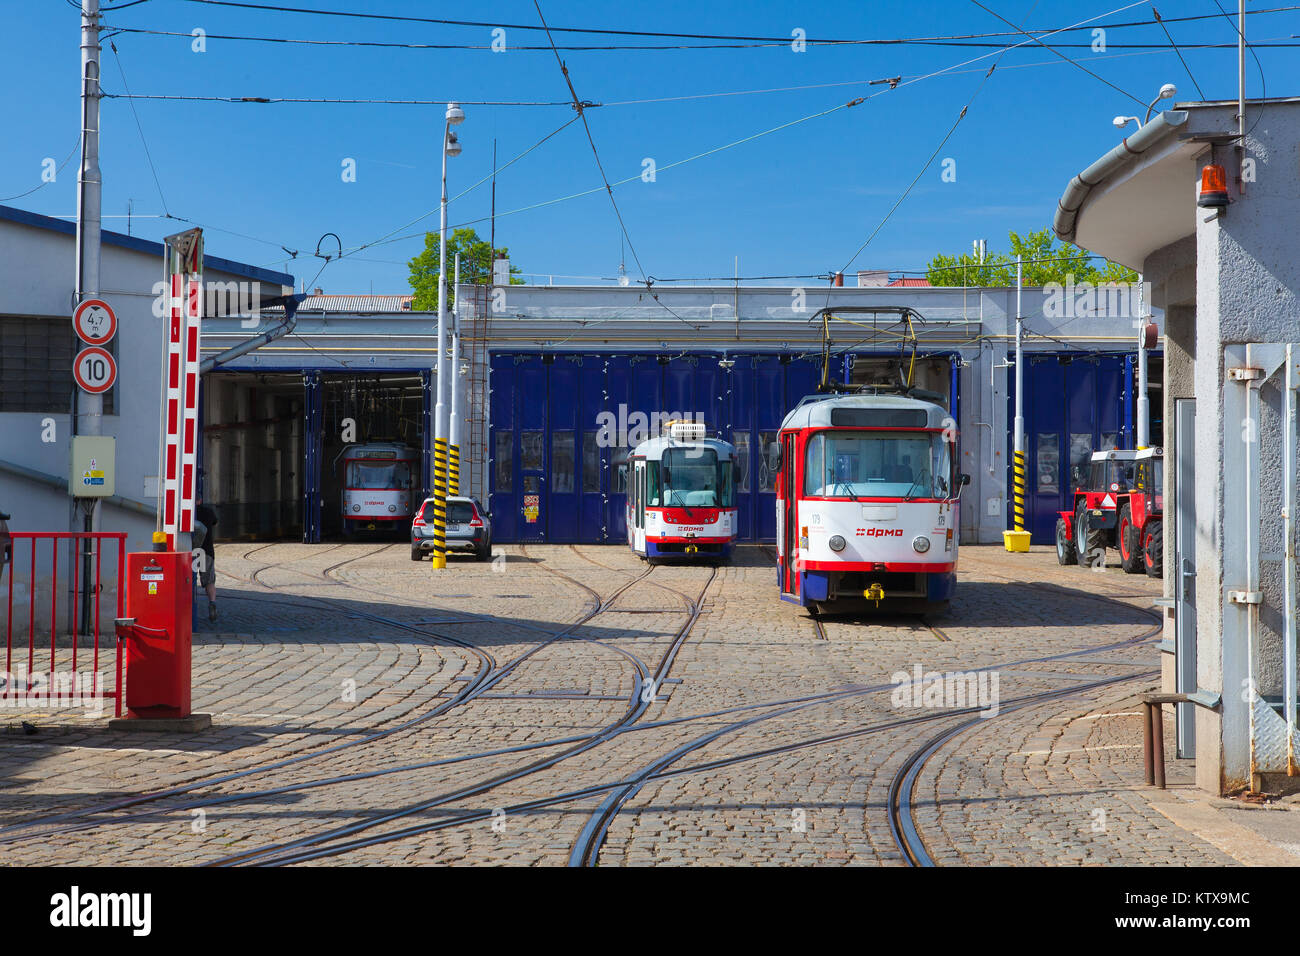 Olomouc, Czech Republic - May 5,2017: The tram stop in the historic center of Olomouc.Famous unesco heritage city and tourist attraction. Stock Photo